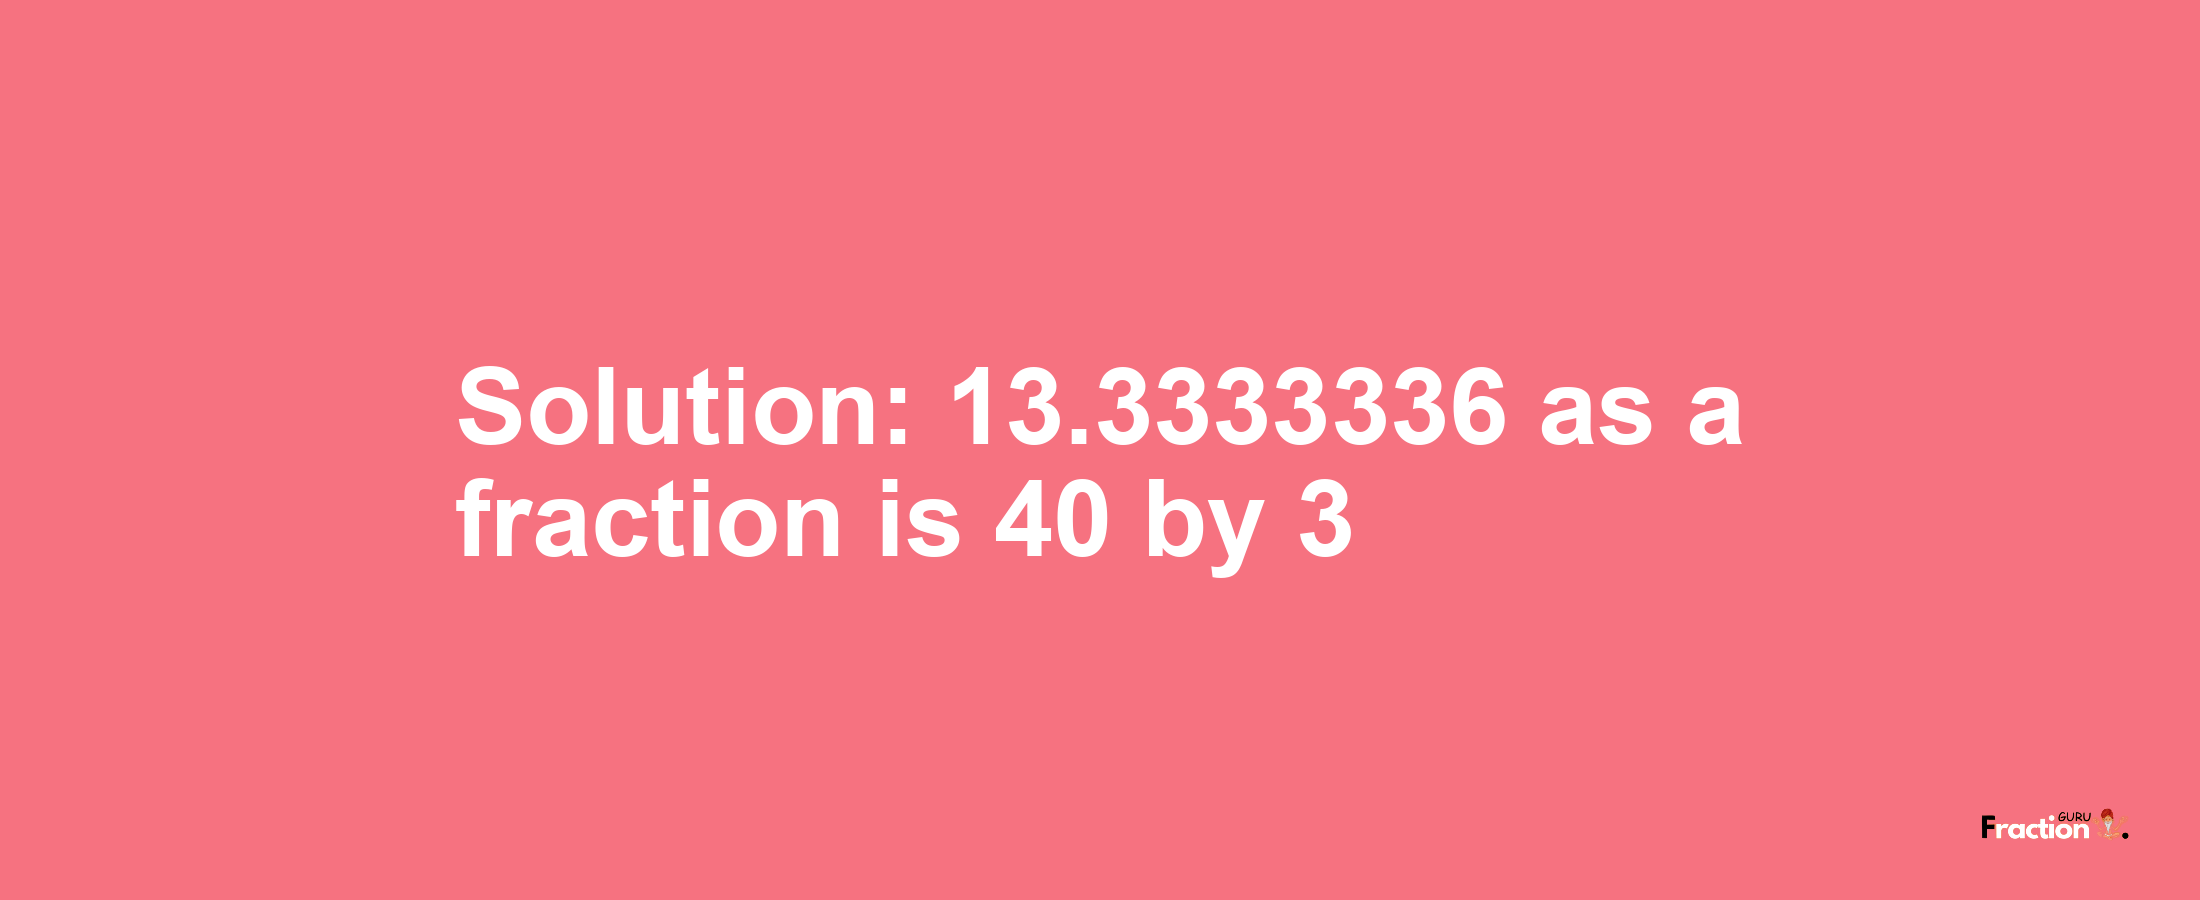 Solution:13.3333336 as a fraction is 40/3